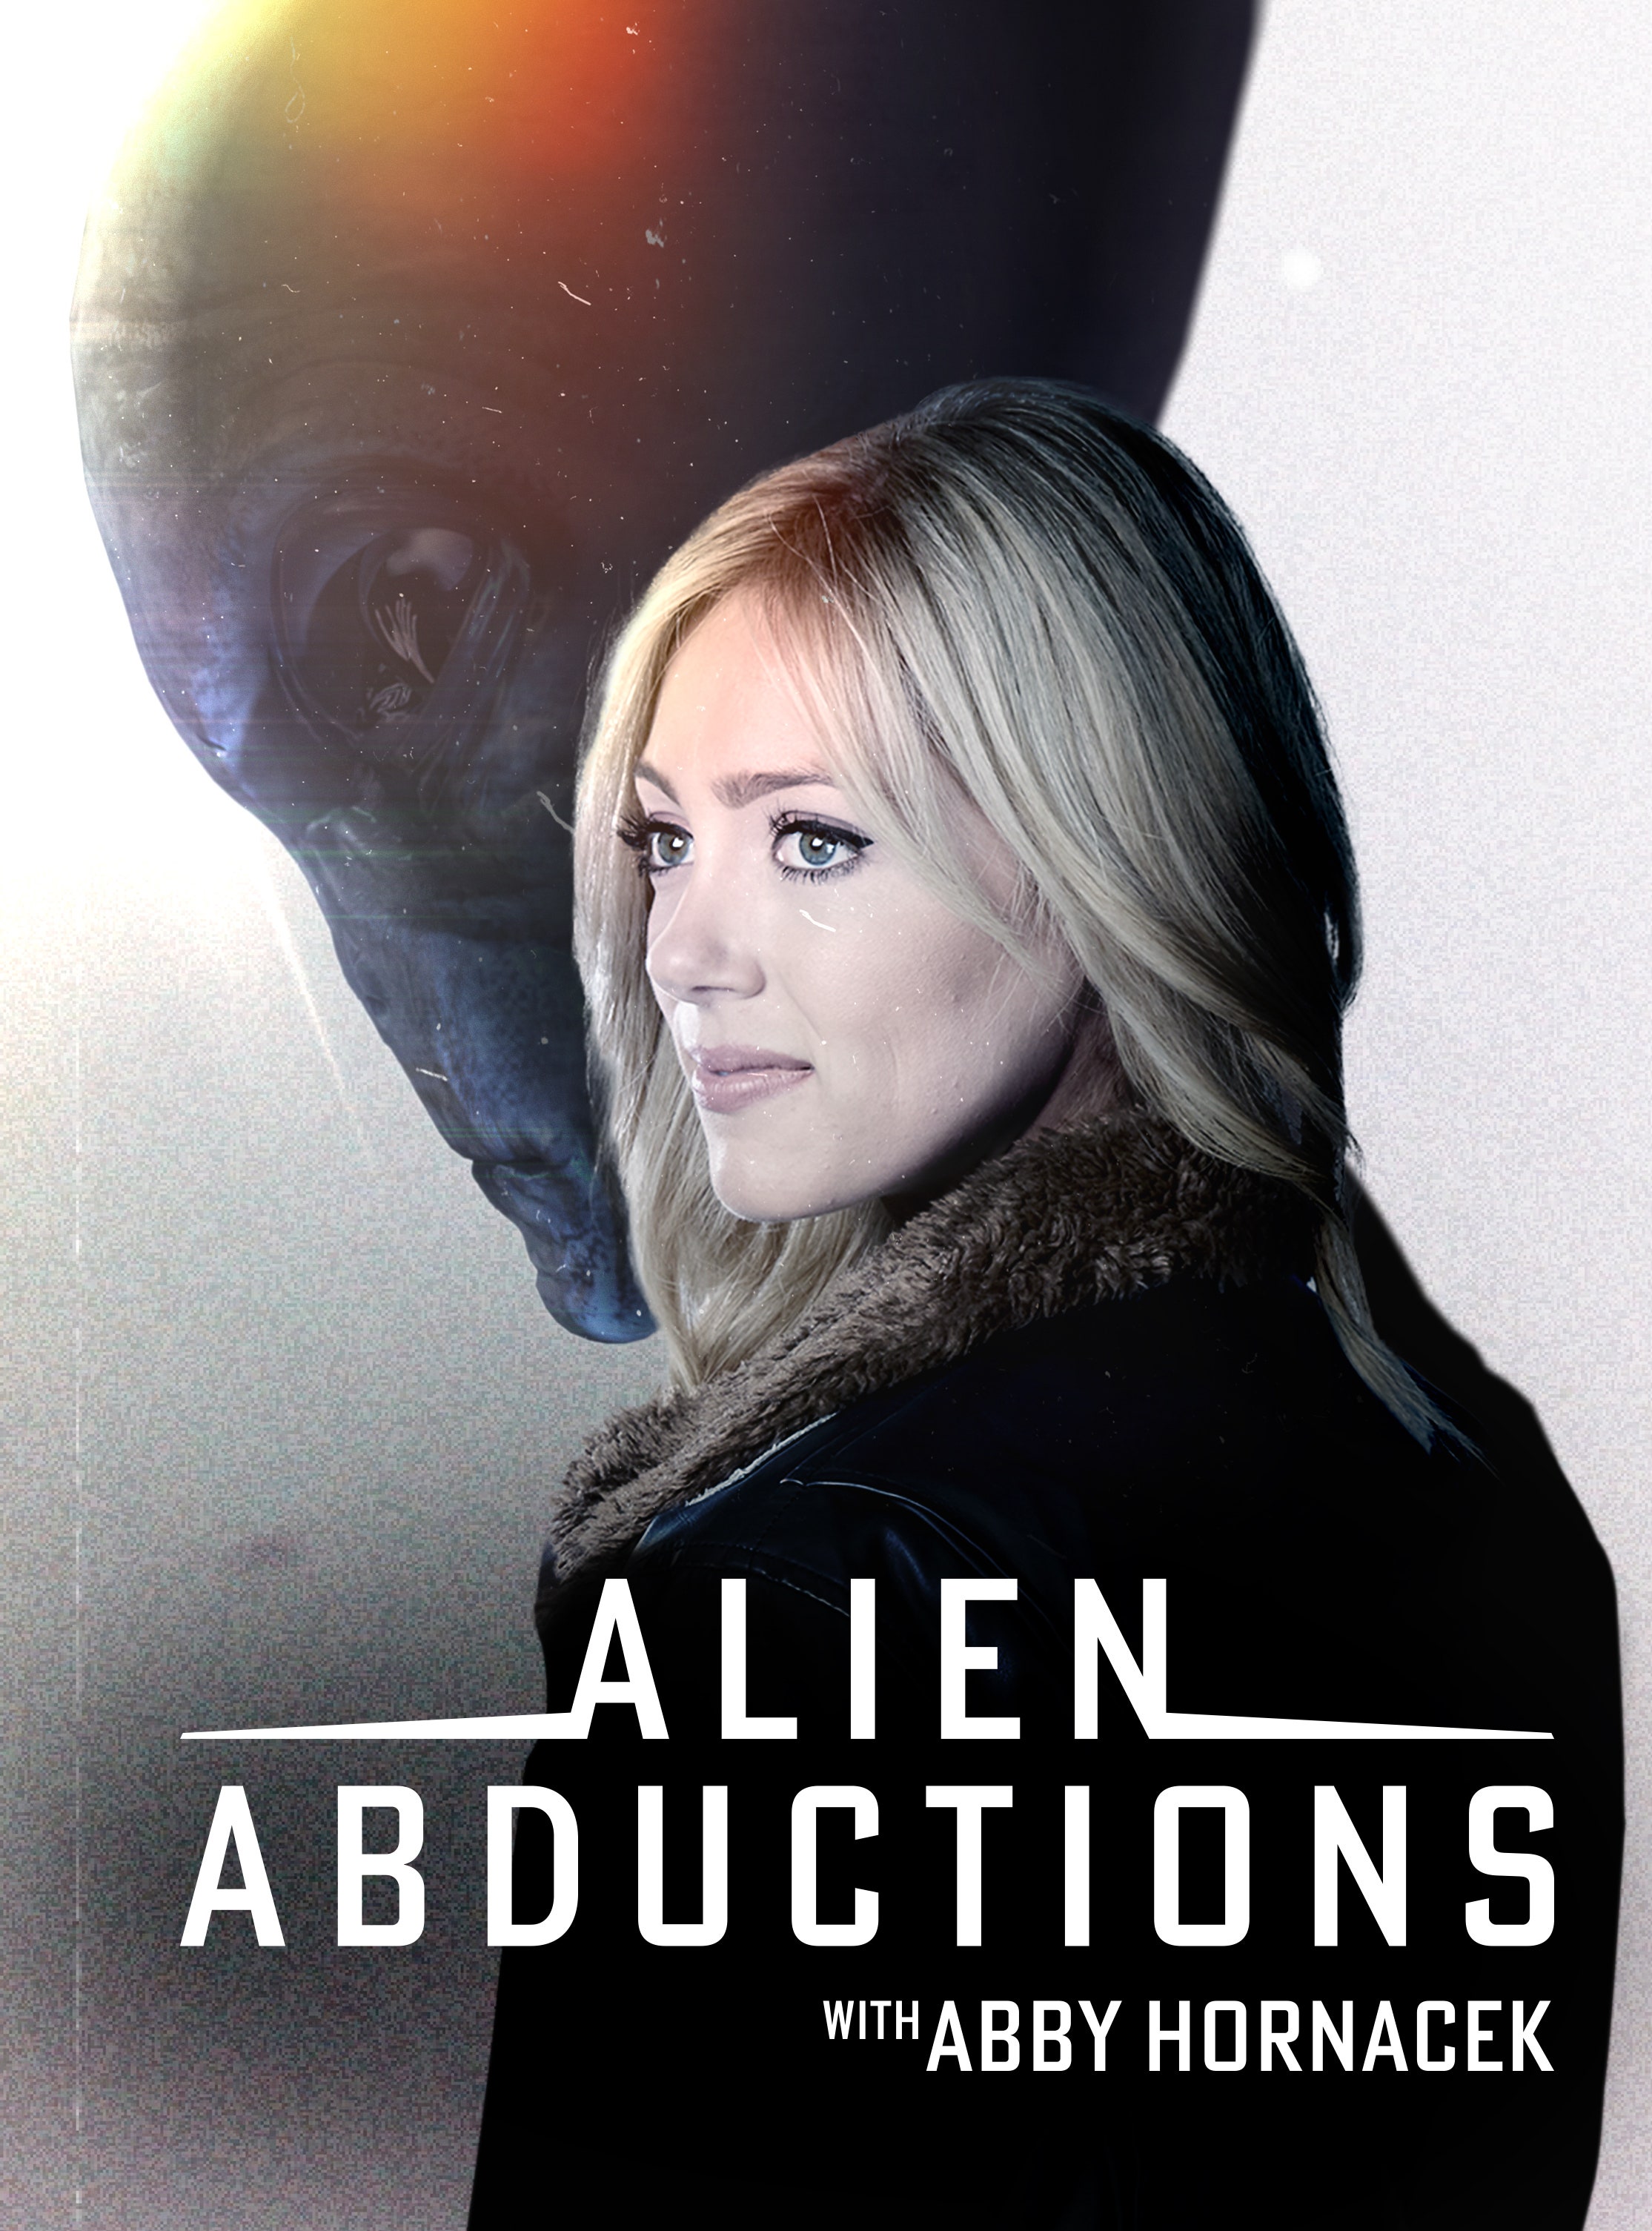 Alien Abductions with Abby Hornacek dcg-mark-poster